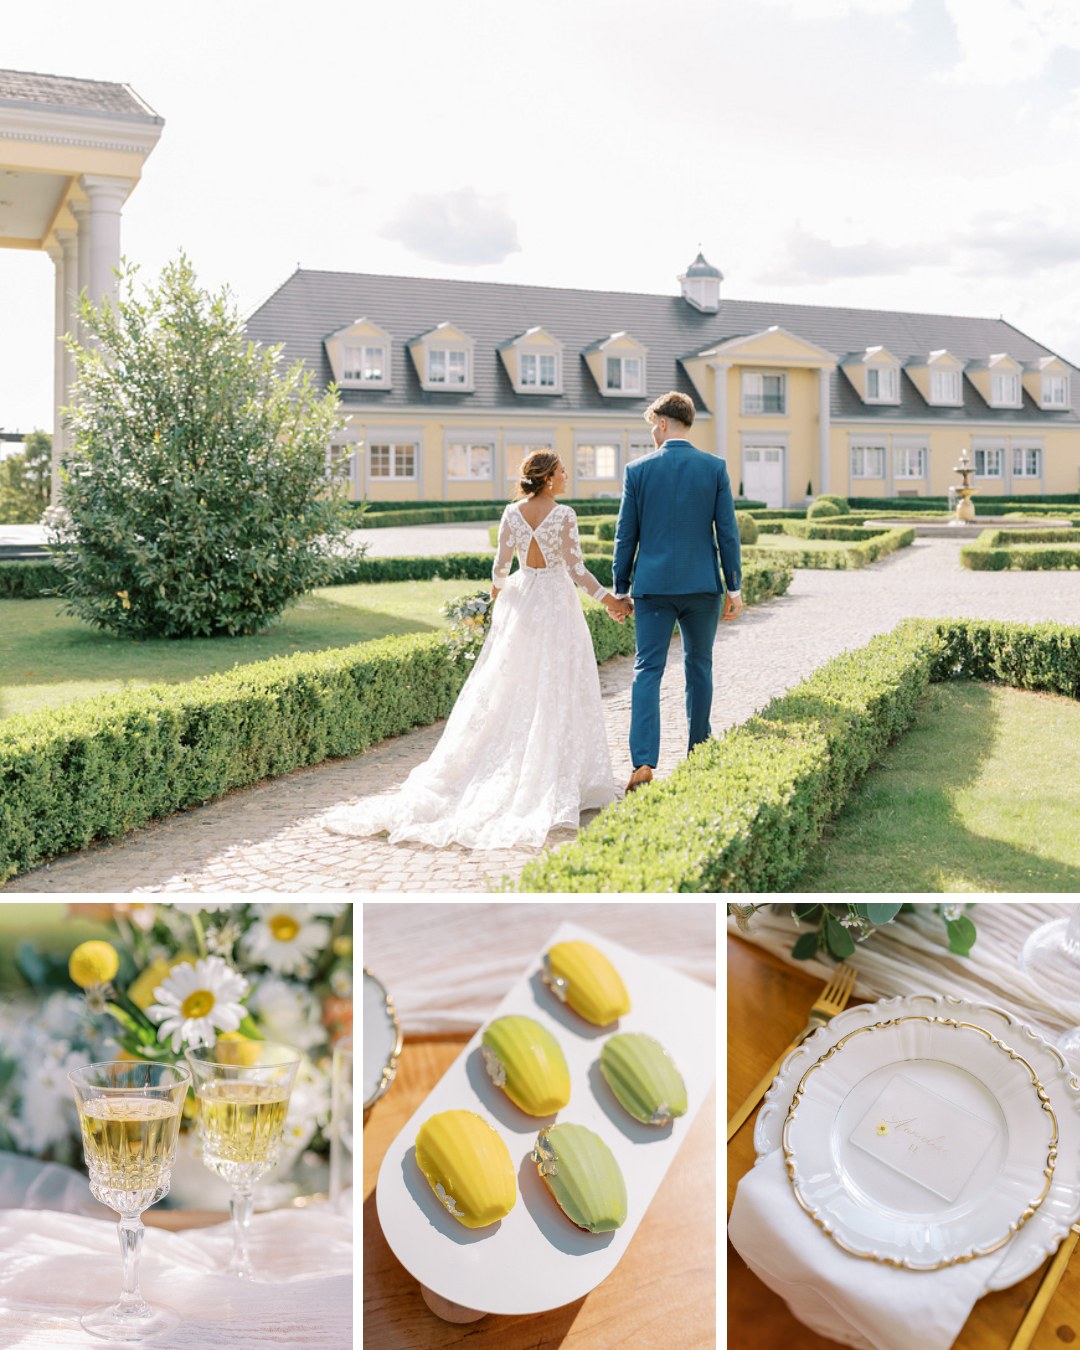 Collage of bride and groom at wedding venue Gut Hesterberg in Germany. Images show finger foods and place settings